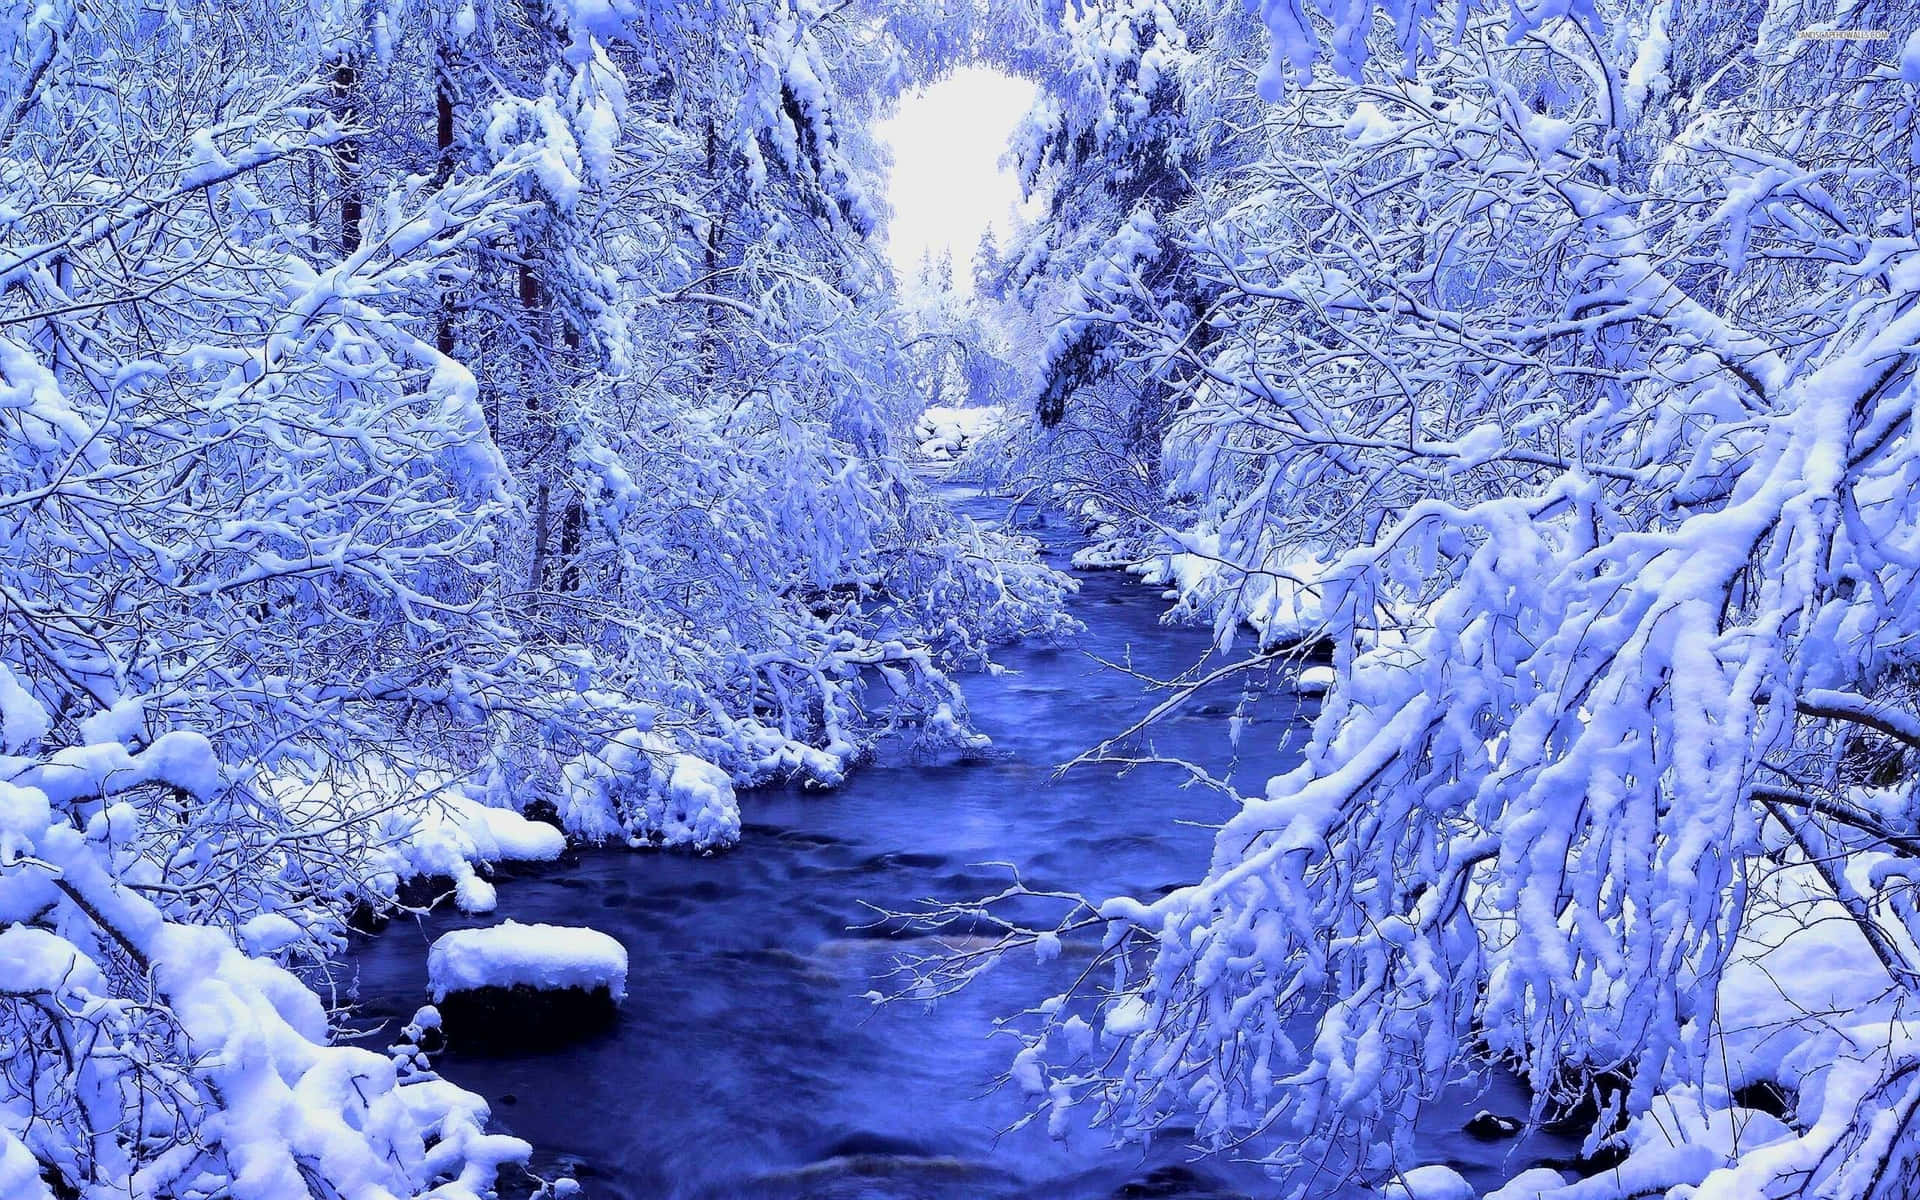 A calm, winter forest surrounded by blanketing snow